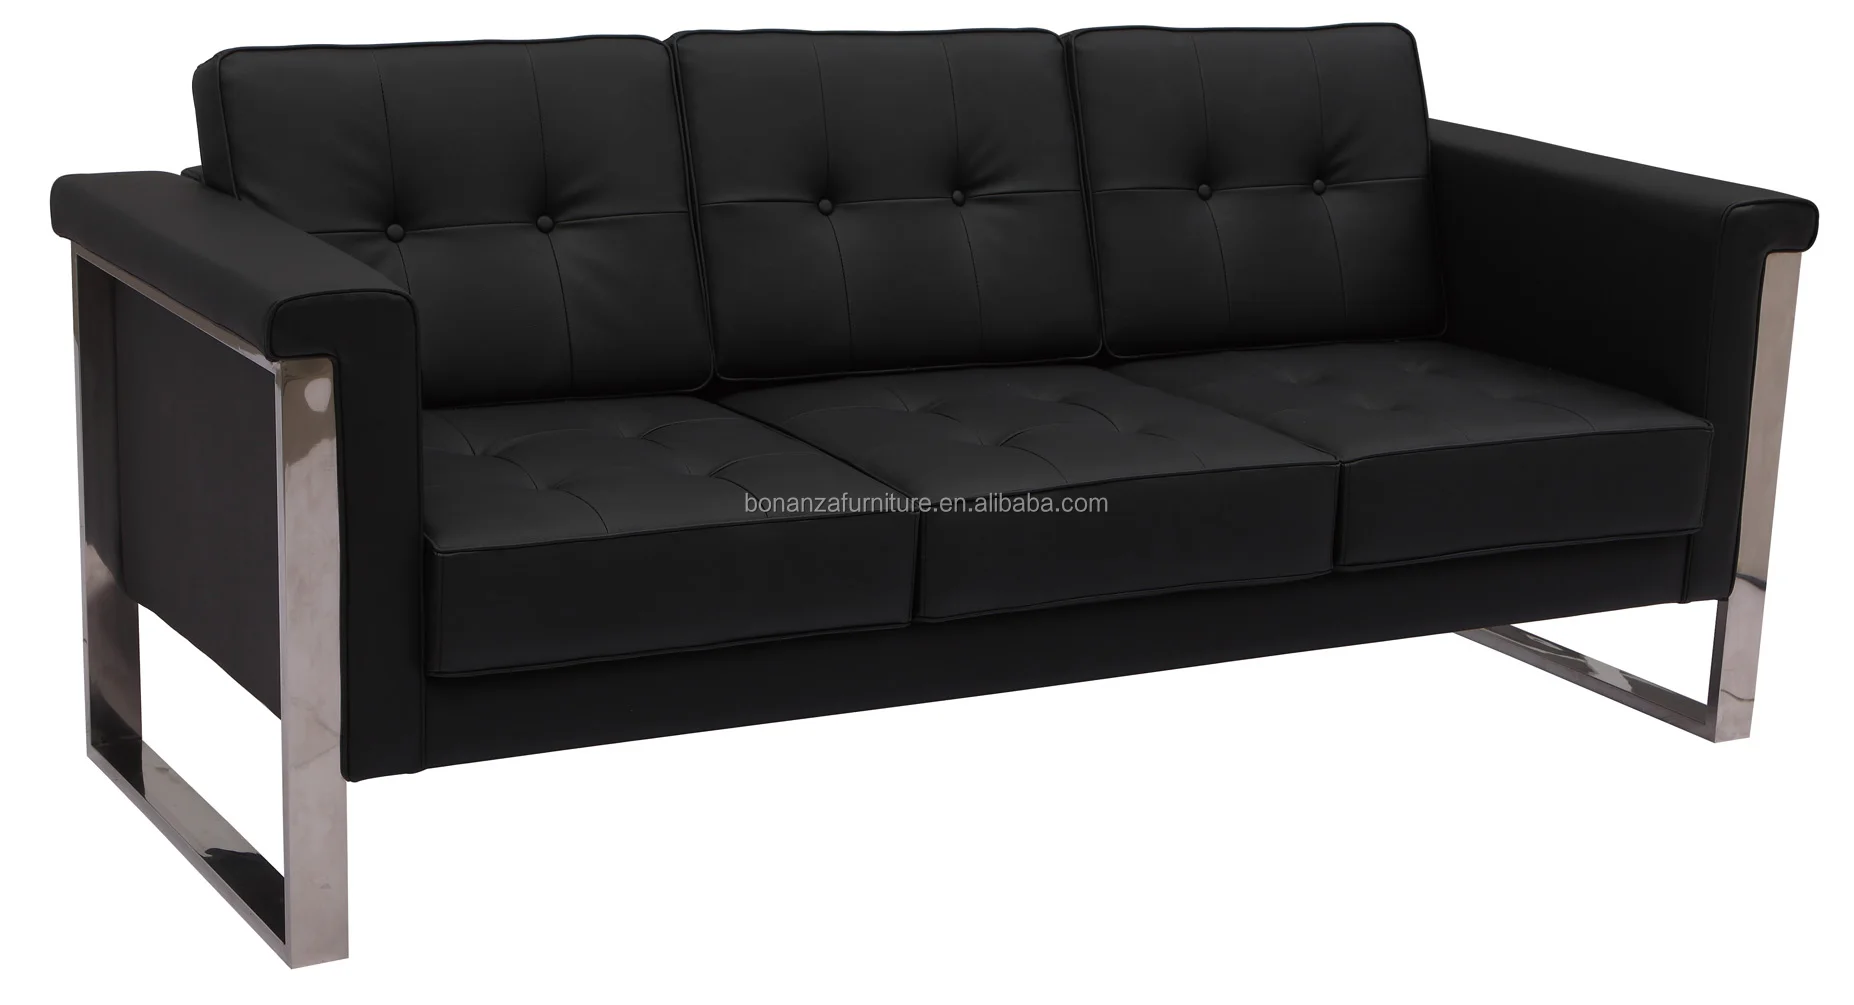 854#2019 made in china leather office lobby sofa furniture sofa for modern office